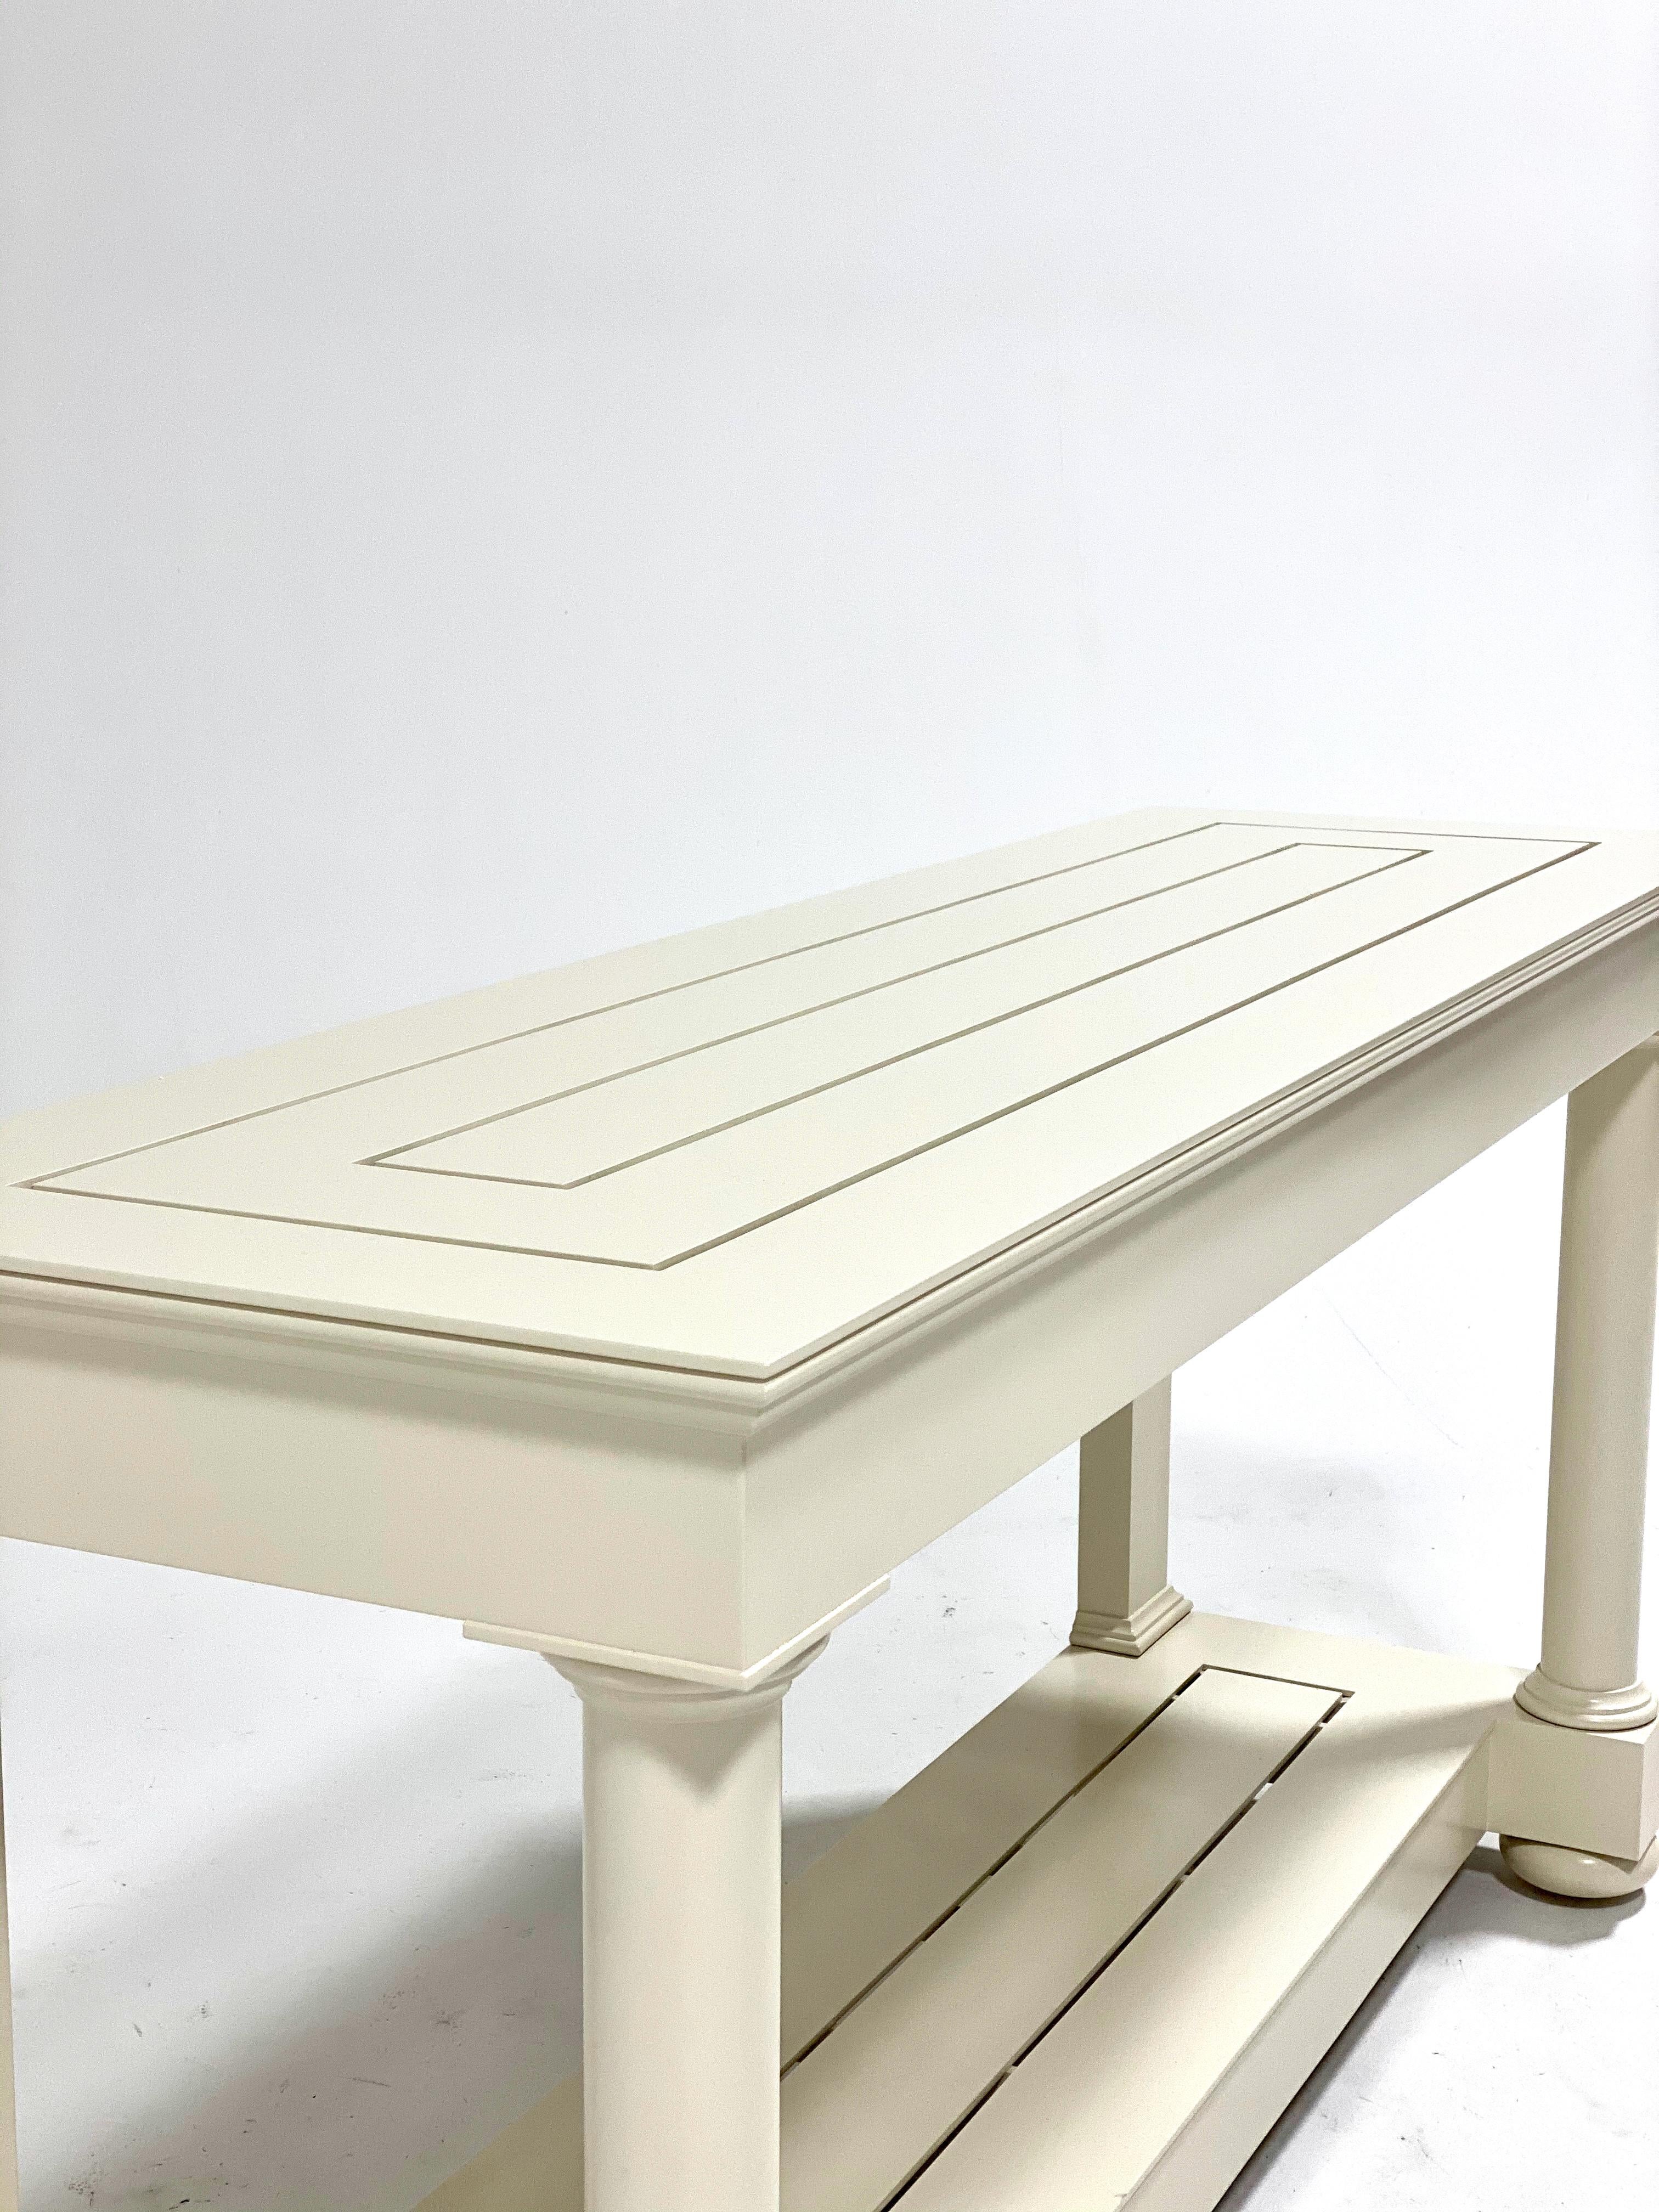 Aluminum Spotswood Pier Table/Console, Outdoor Garden Furniture by McKinnon and Harris 